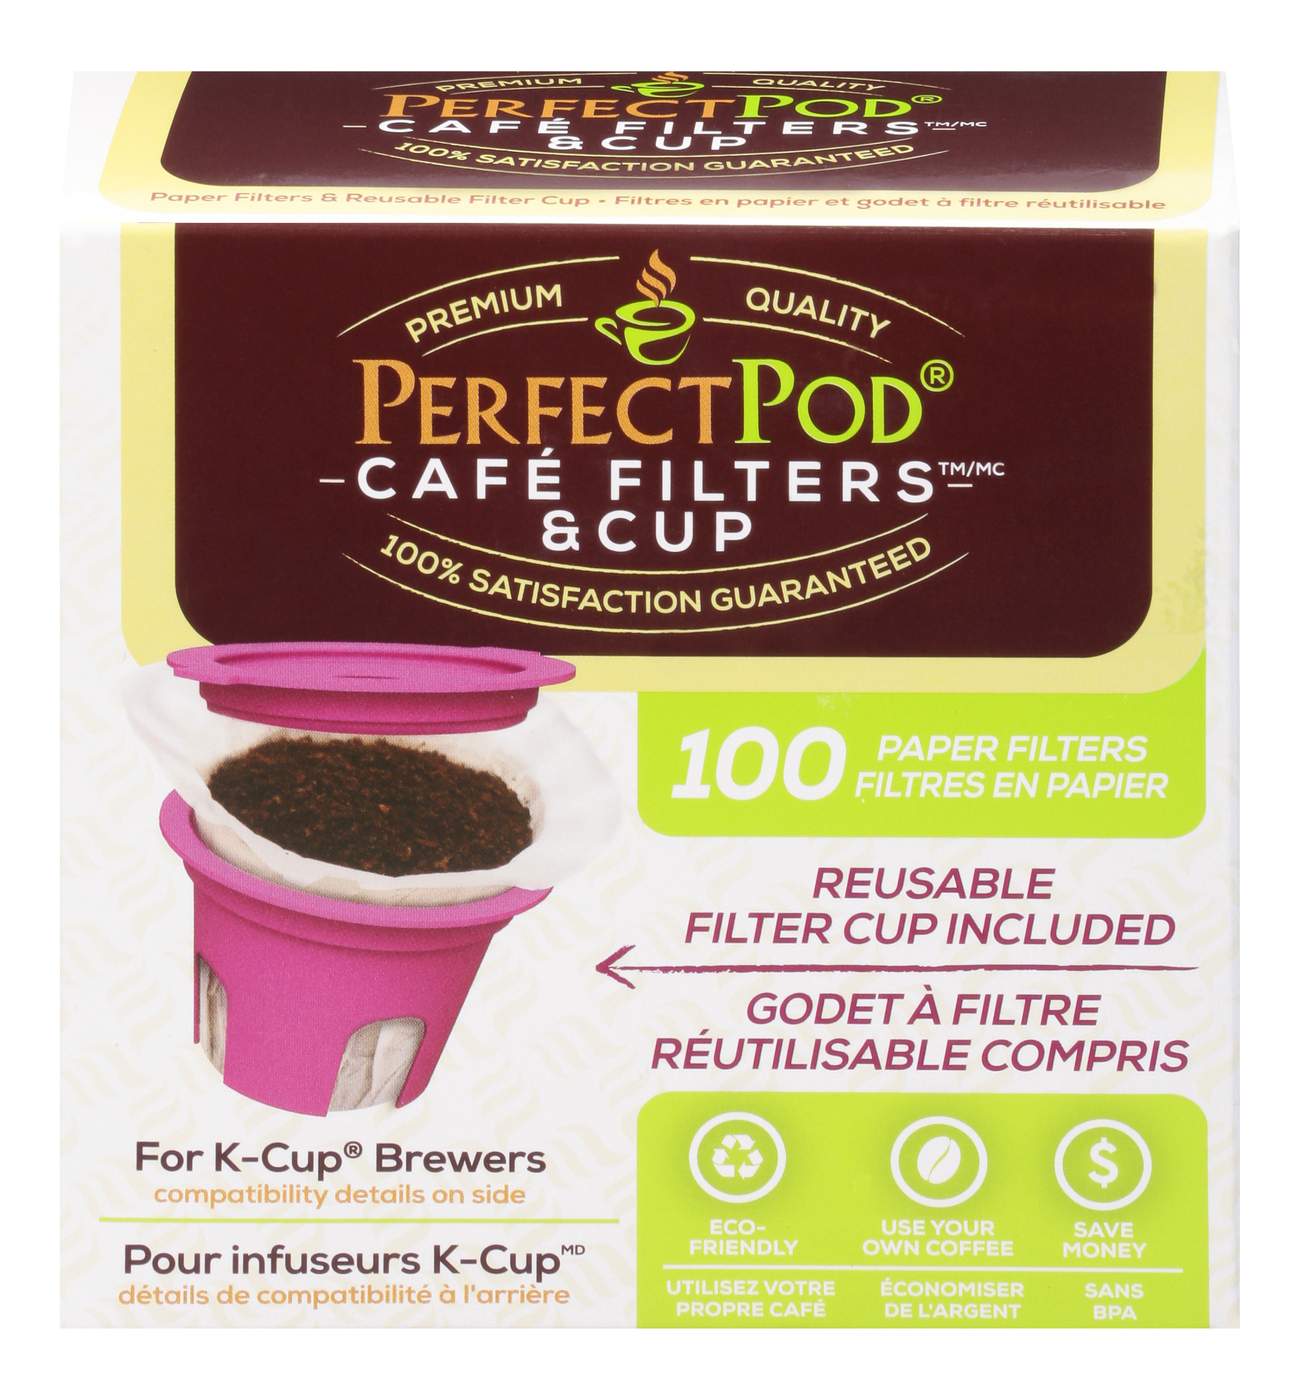 Perfect Pod Cafe Filters & Cup Value Pack; image 1 of 4